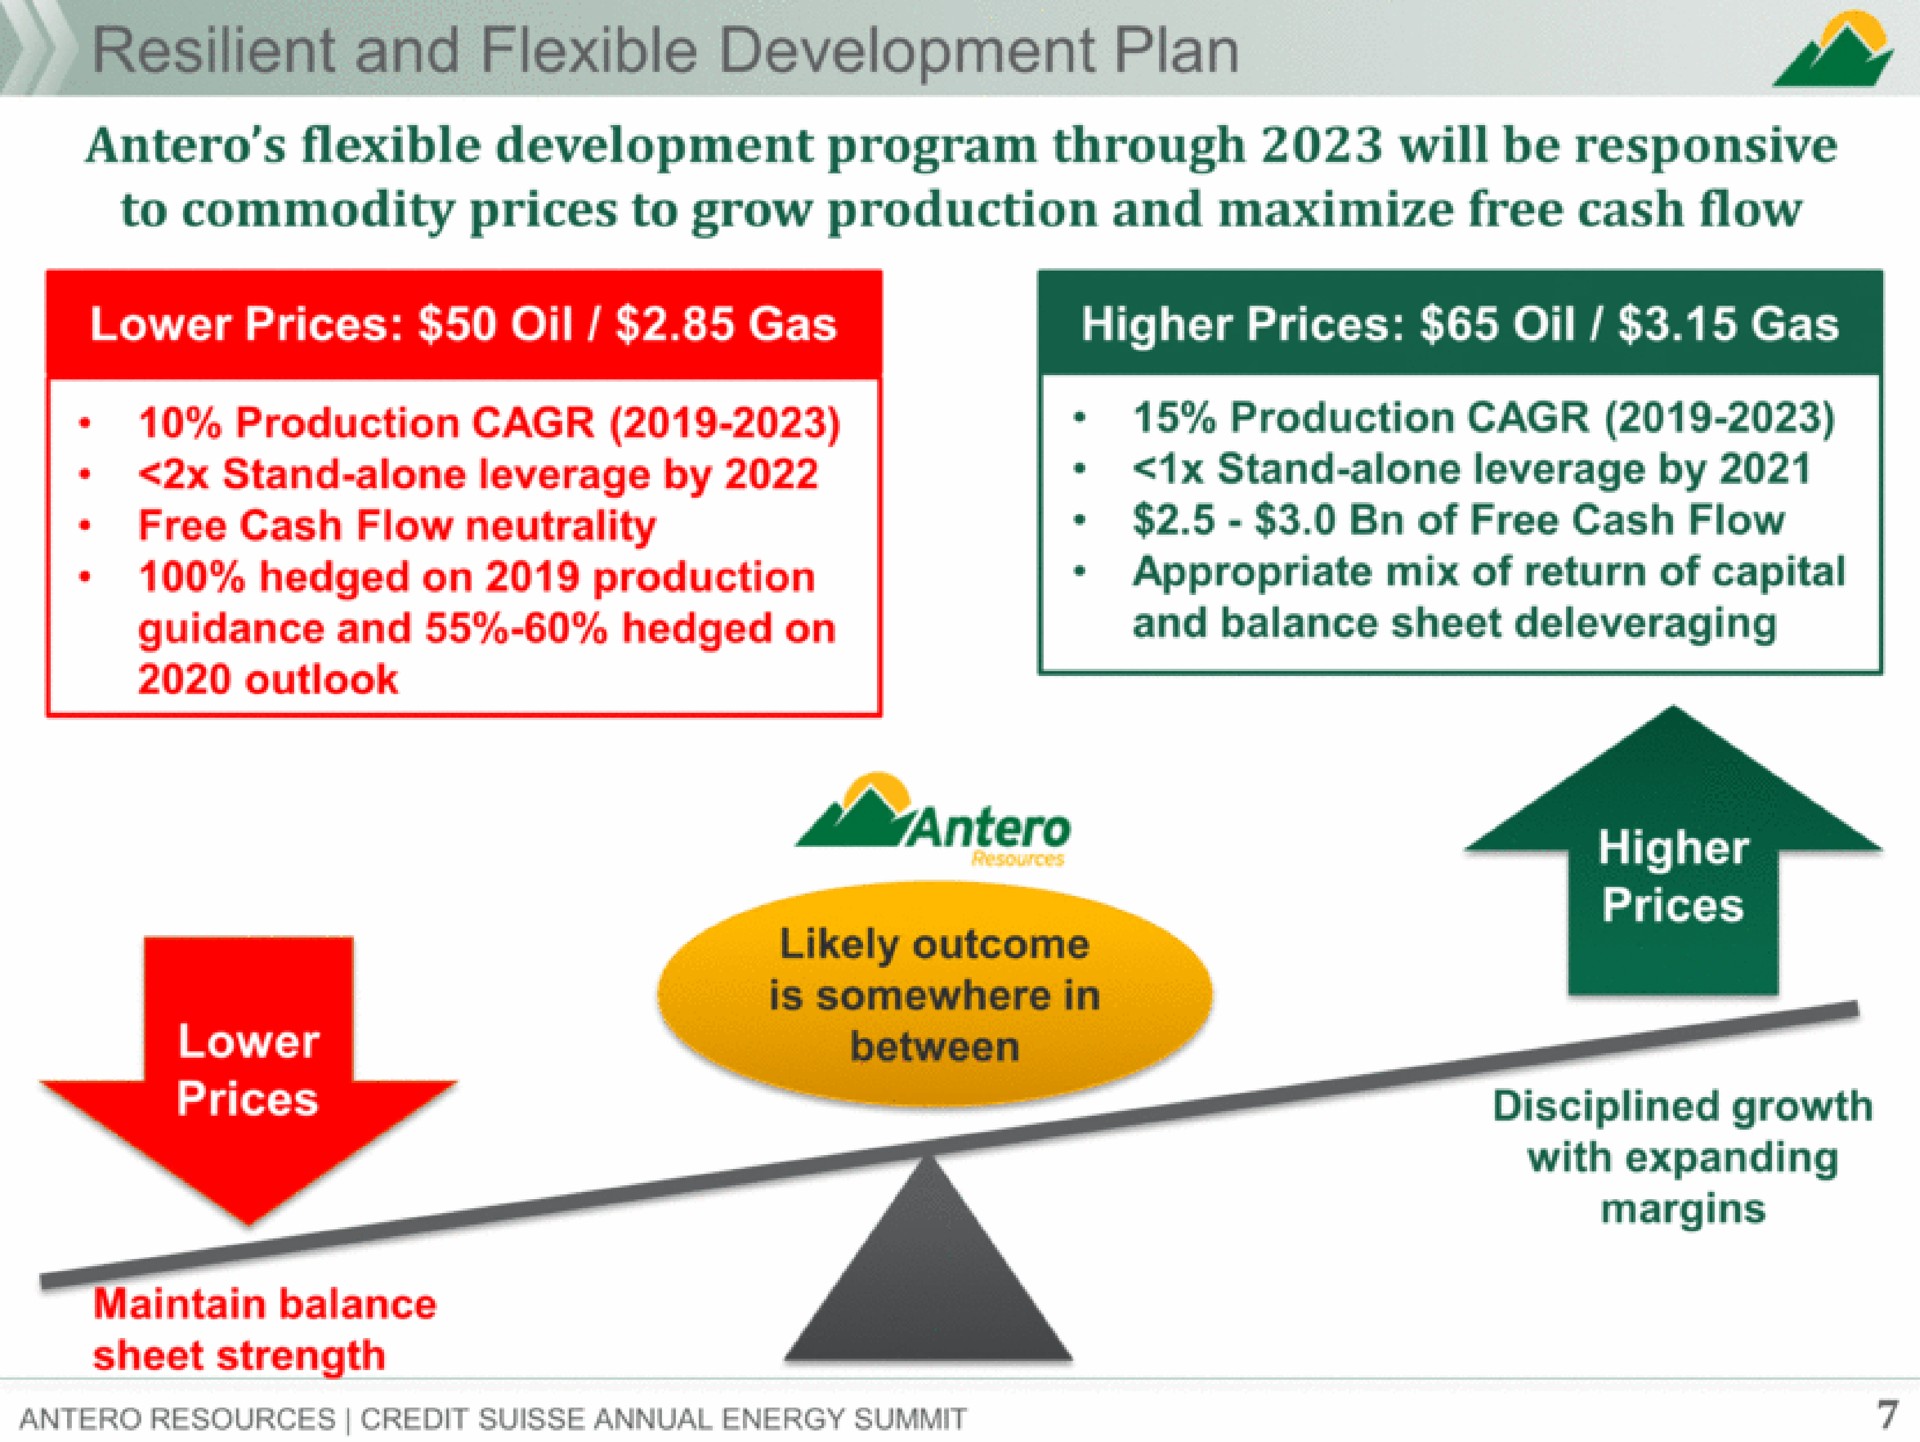 resilient and flexible development plan to commodity prices to grow production and maximize free cash flow | Antero Midstream Partners